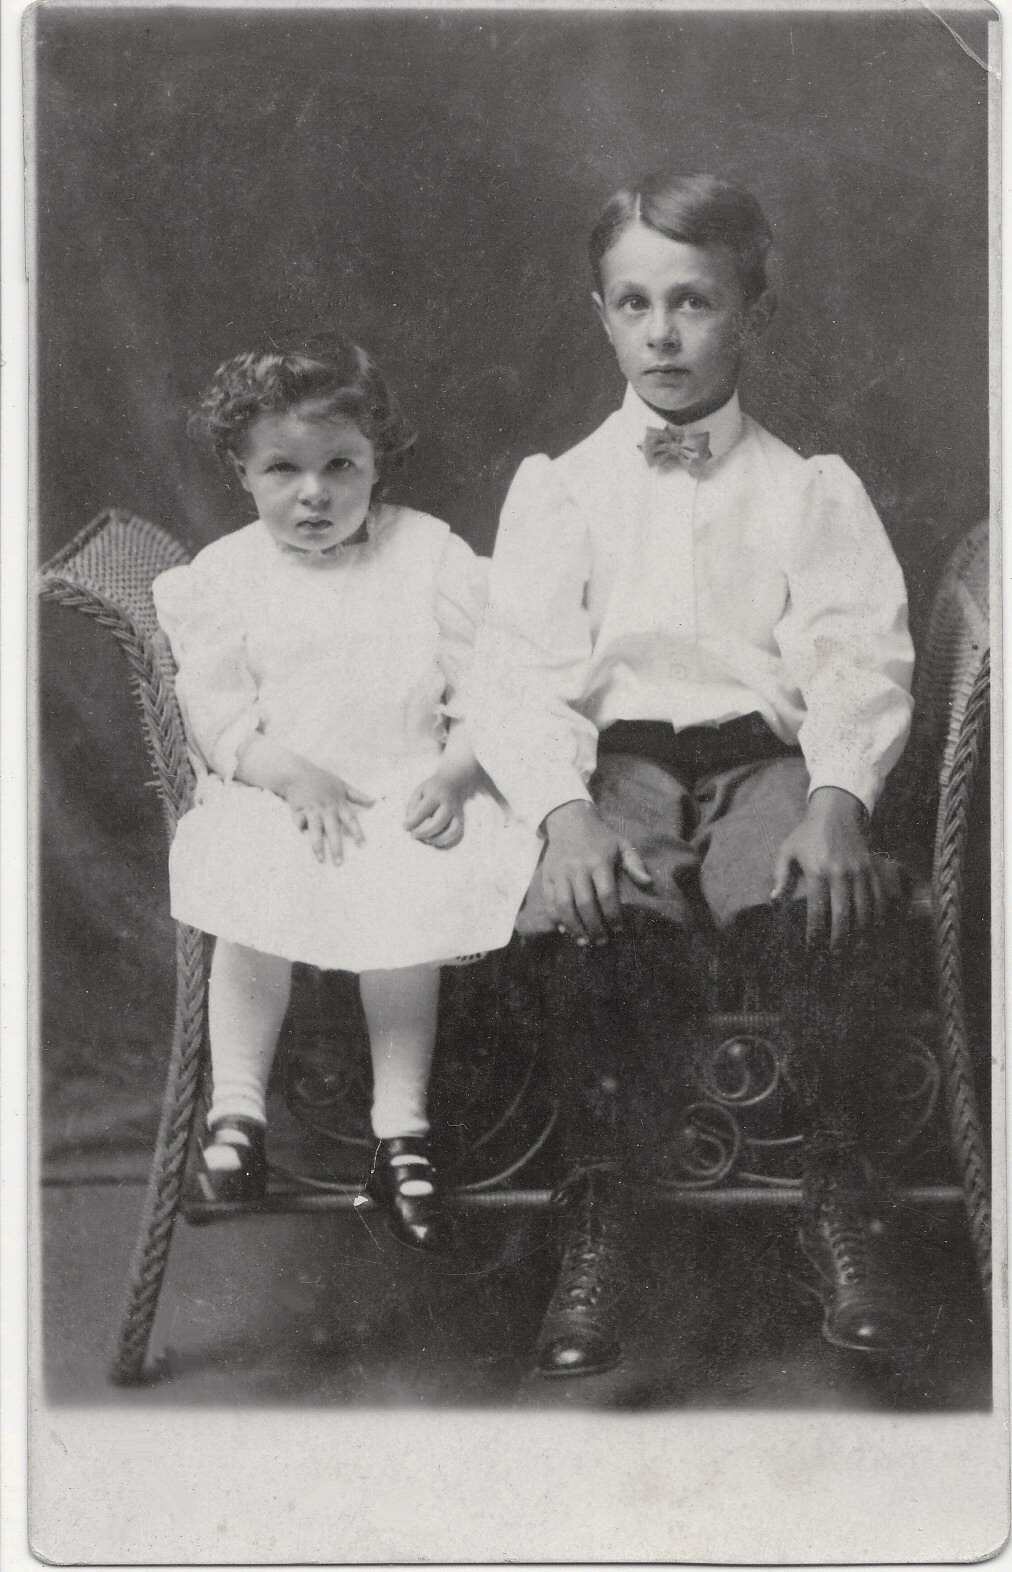 Norris and Mabel Young